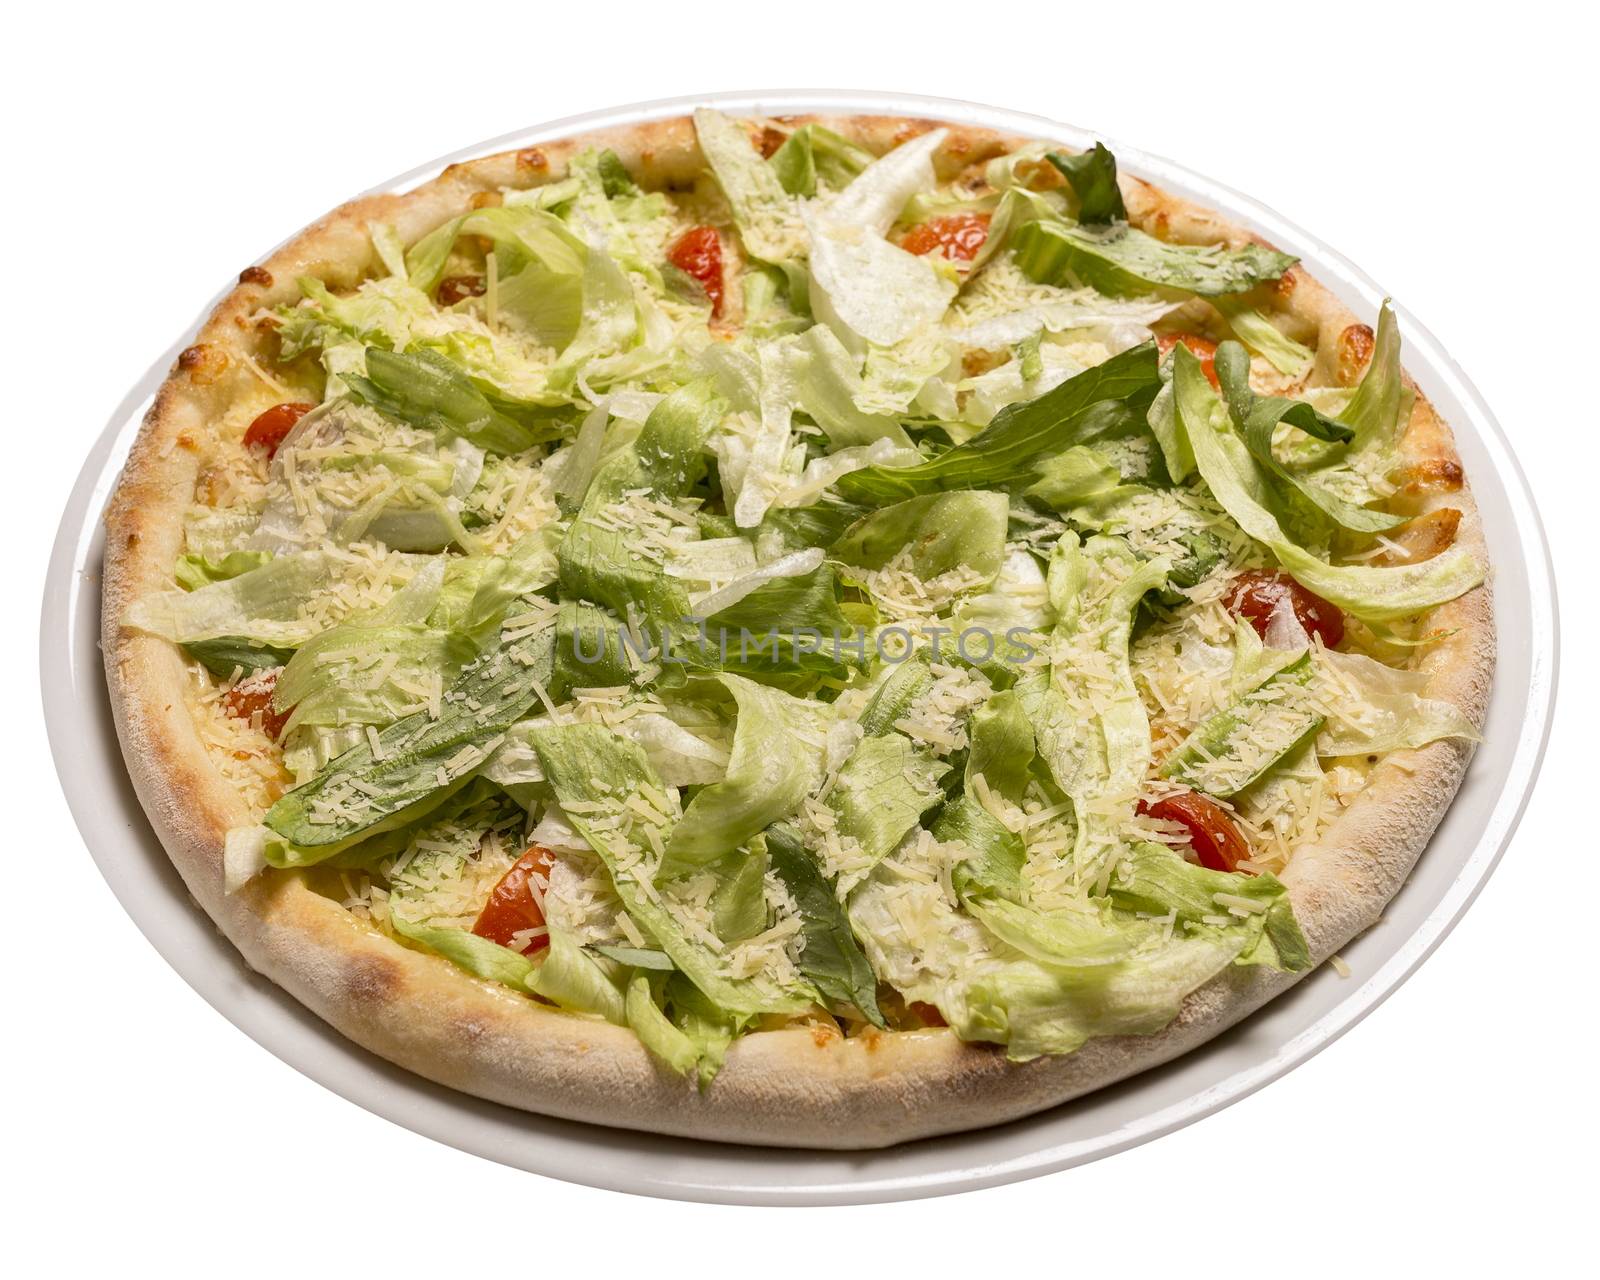 Caesar pizza. Isolated image on white background. by 977_ReX_977